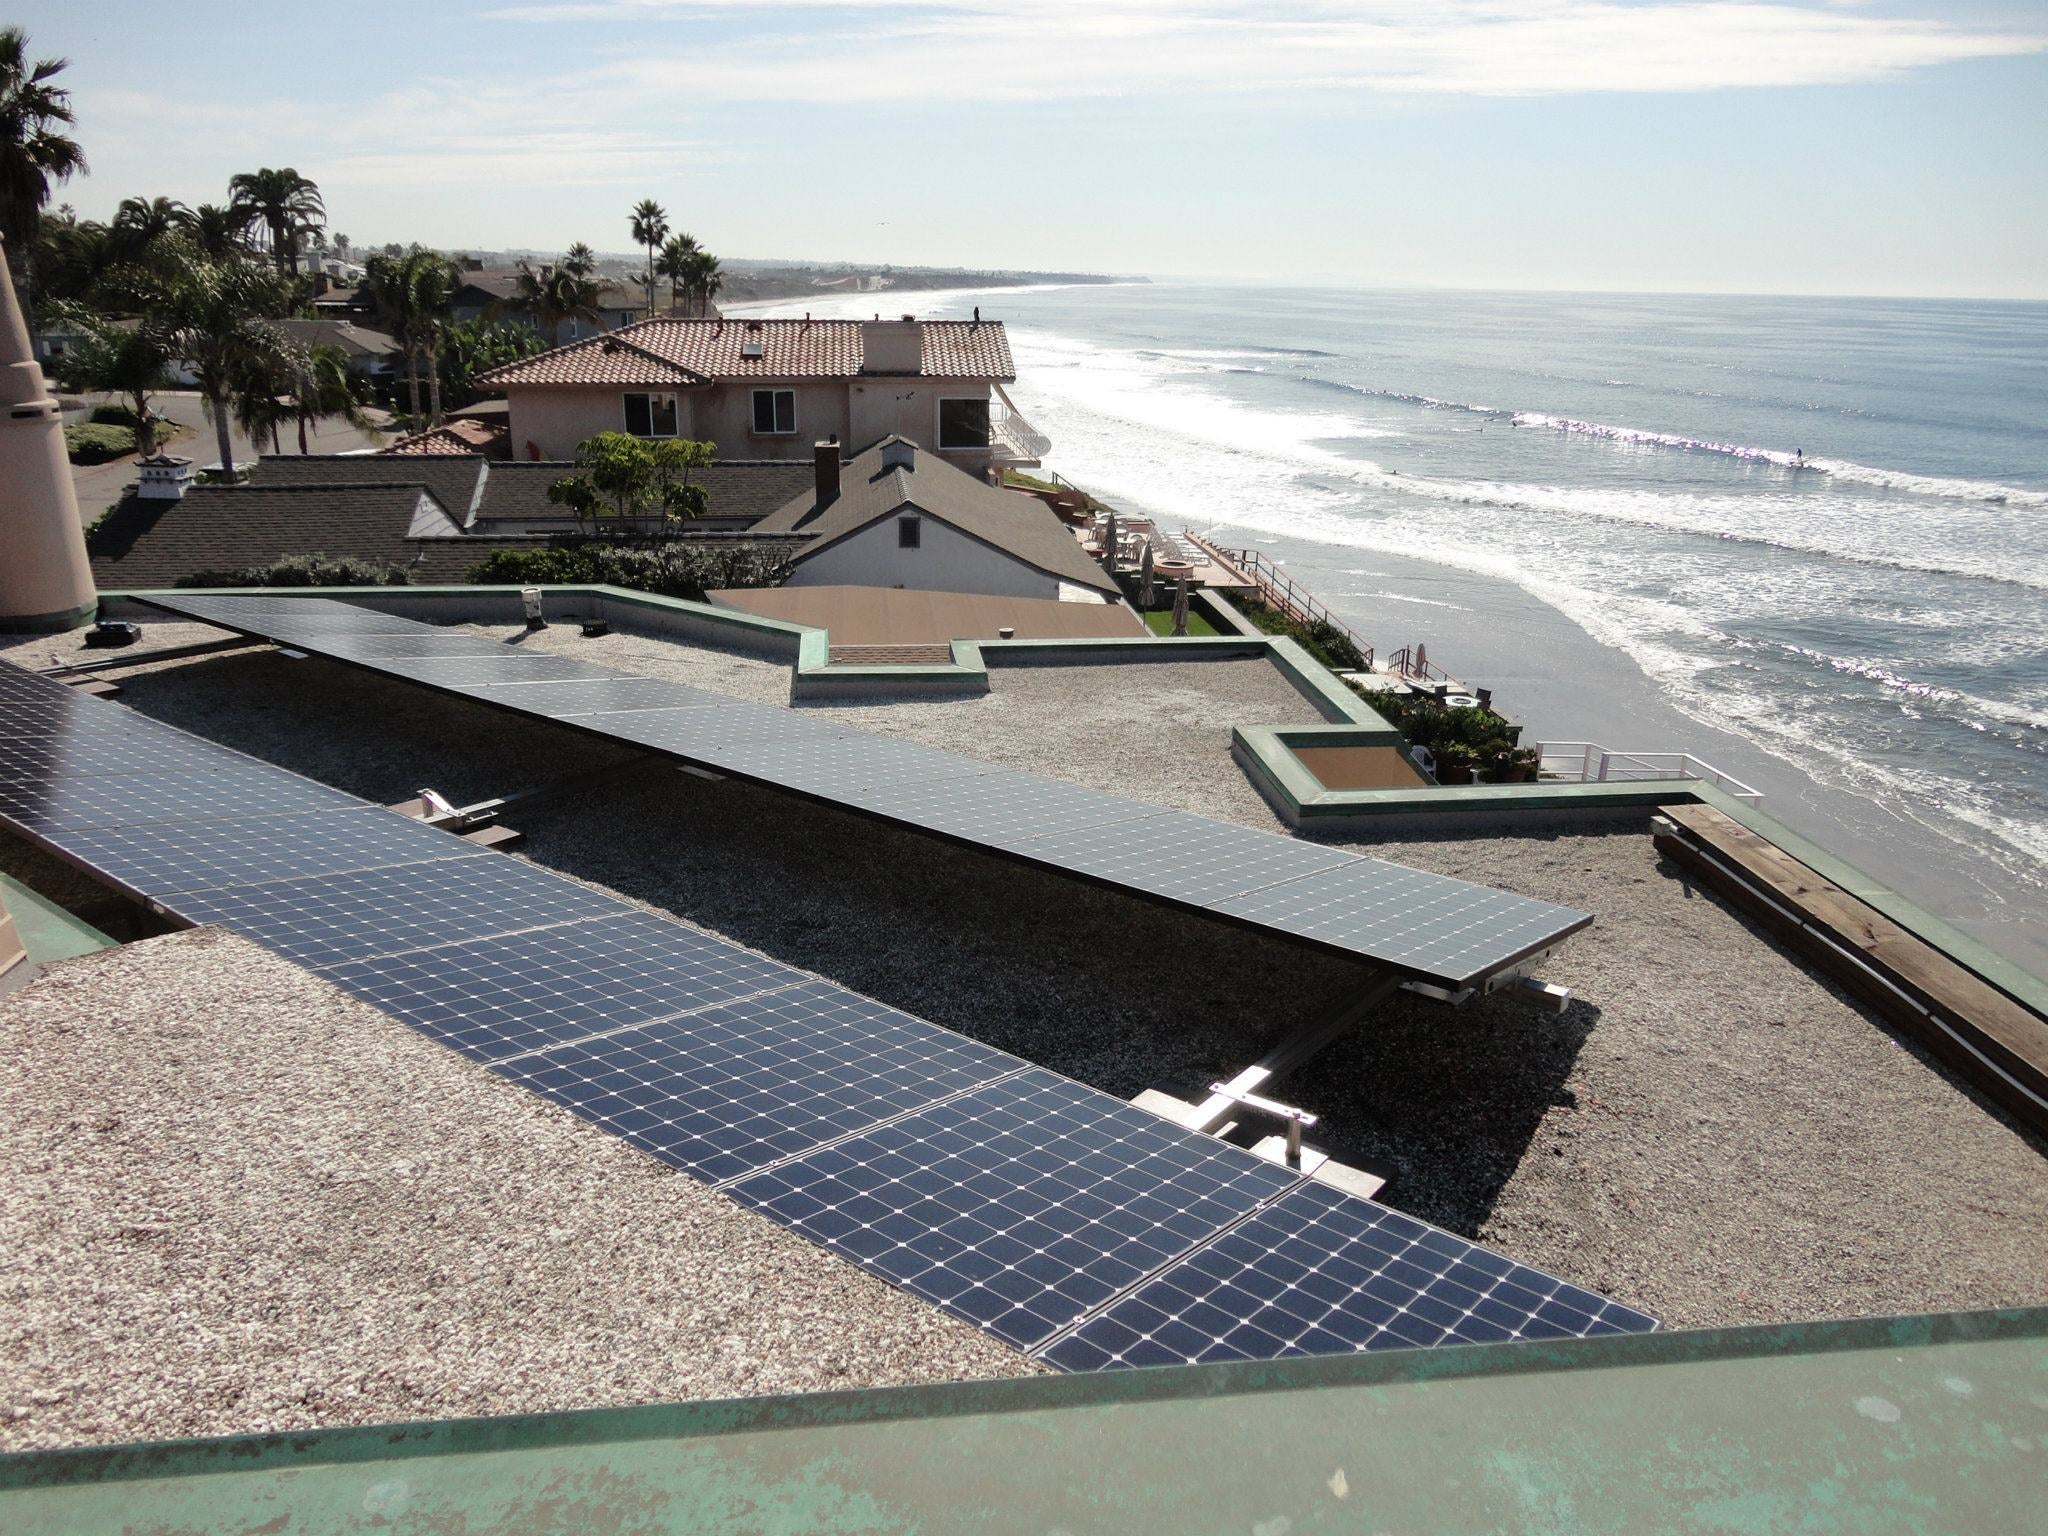 Solar power with a view